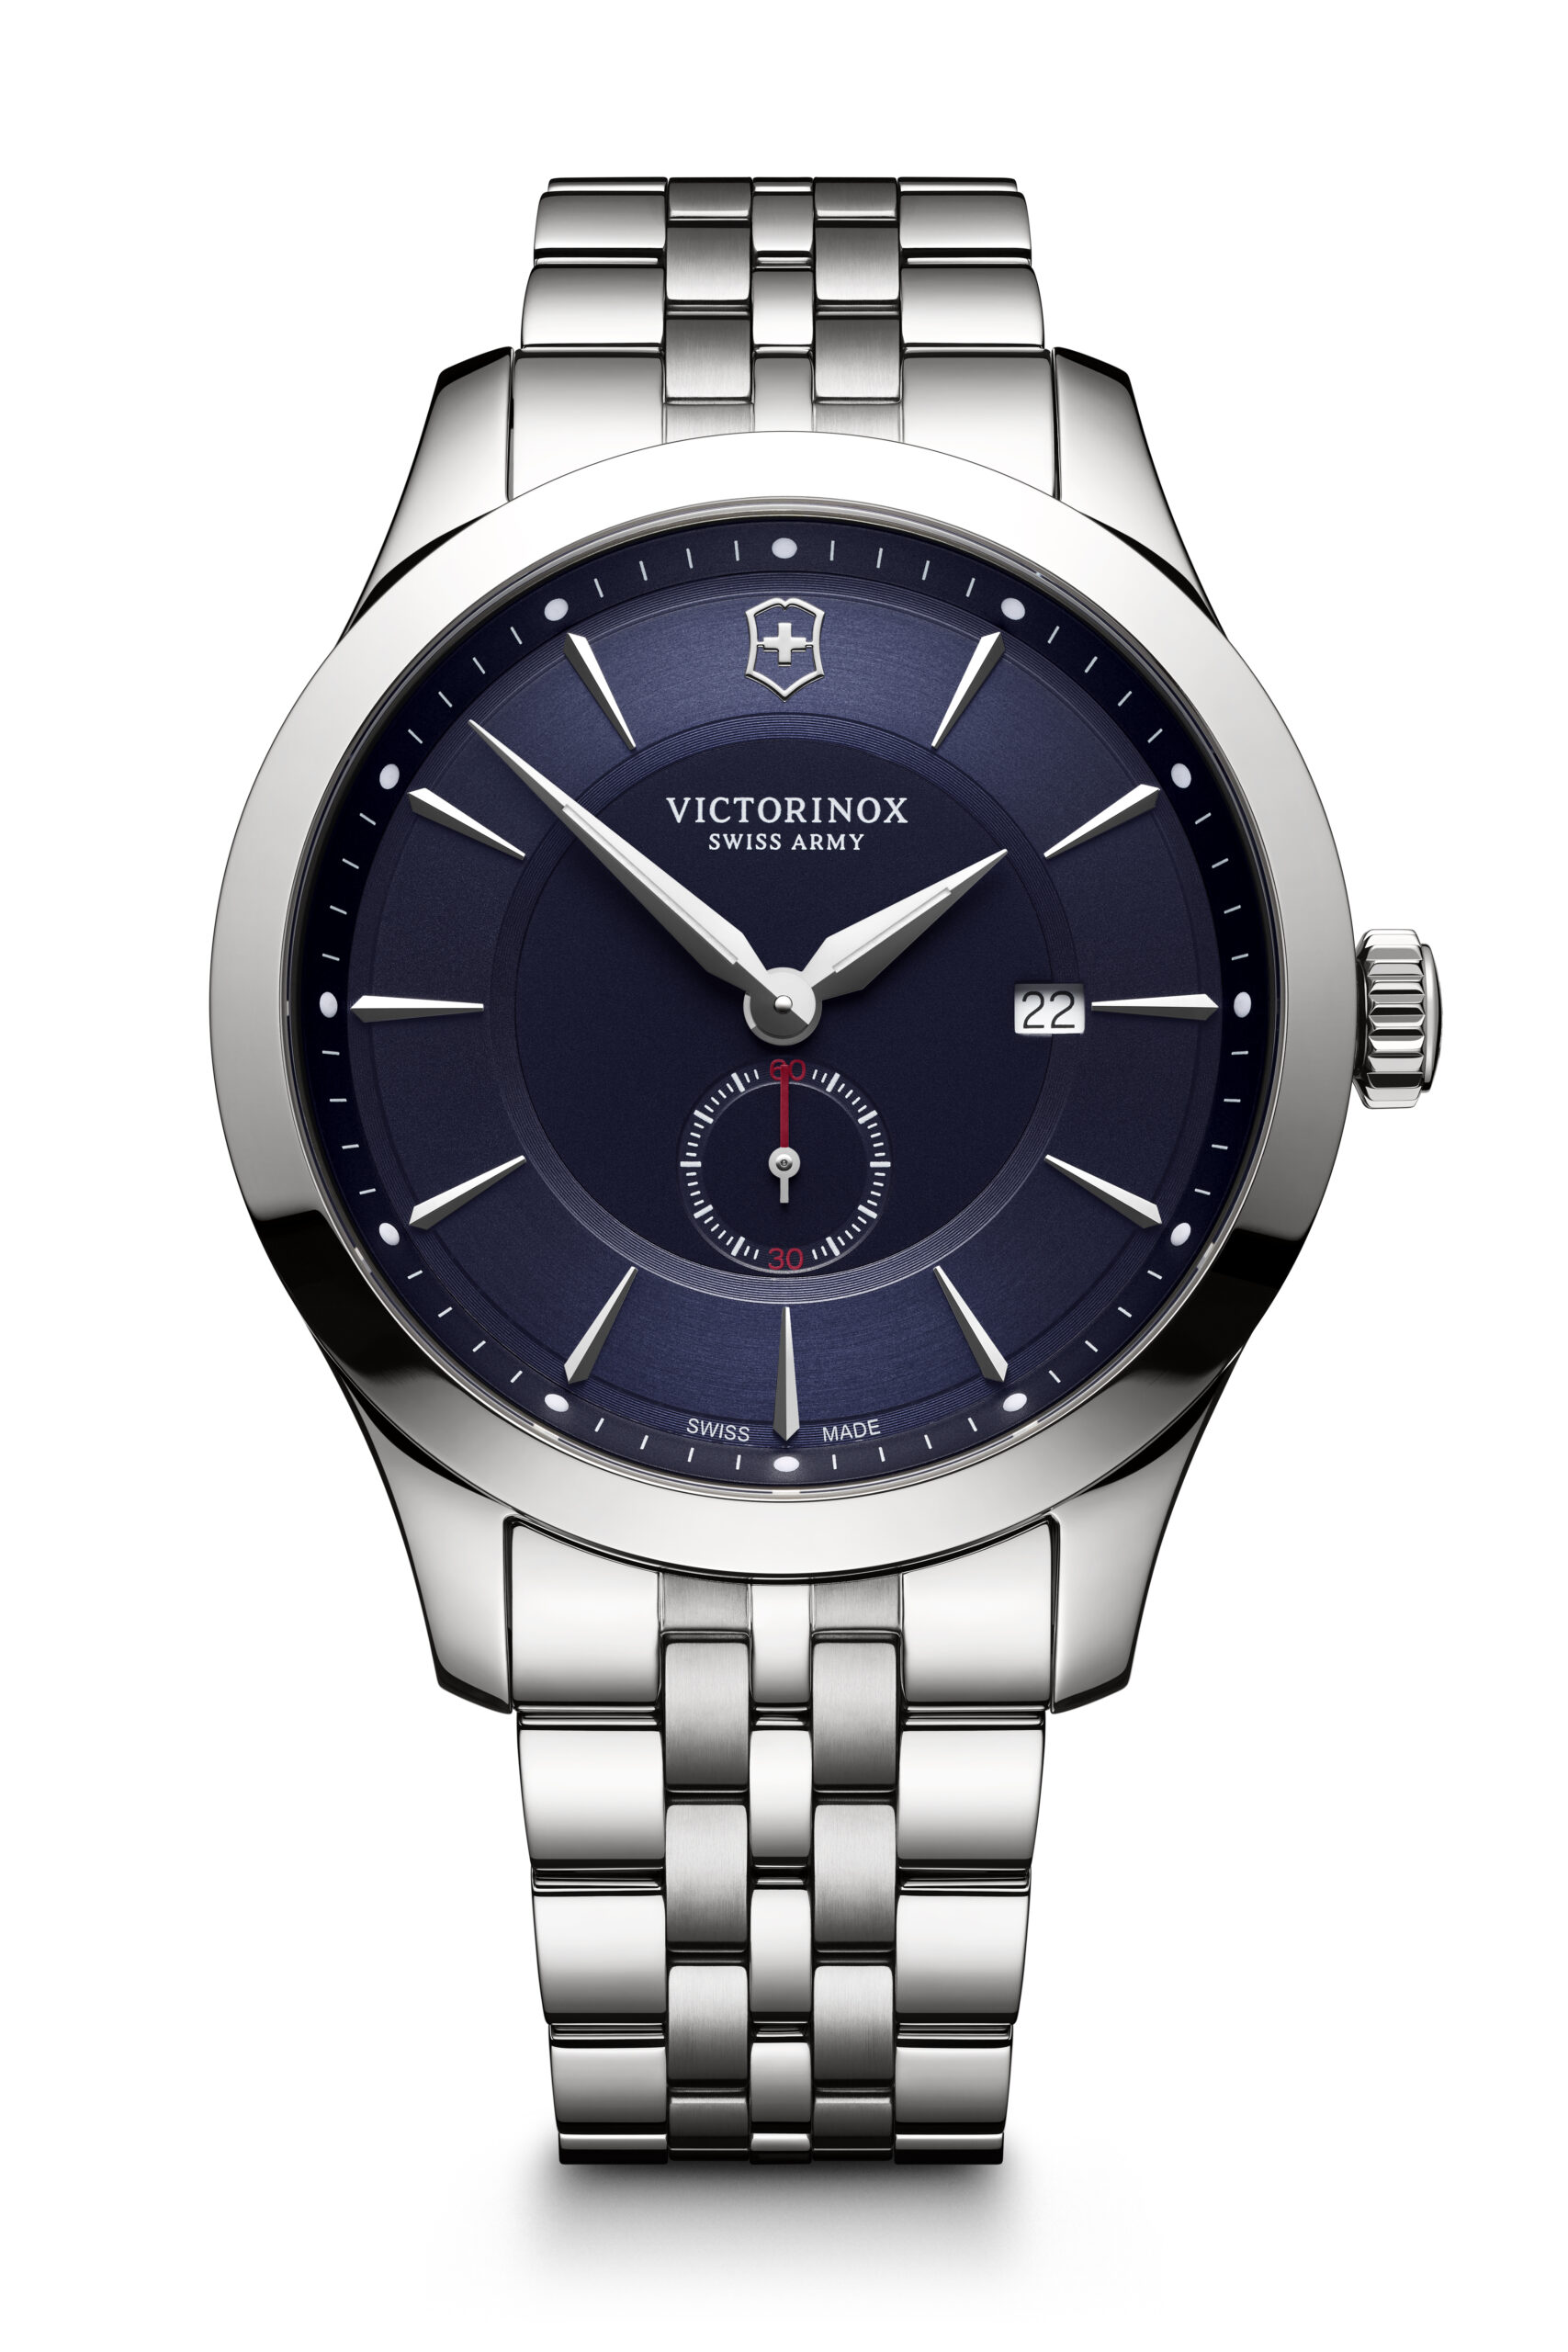 This Alliance watch from Victorinox Swiss Army features a 44mm stainless steel case, stainless steel bracelet, a blue dial, and a quartz movement.